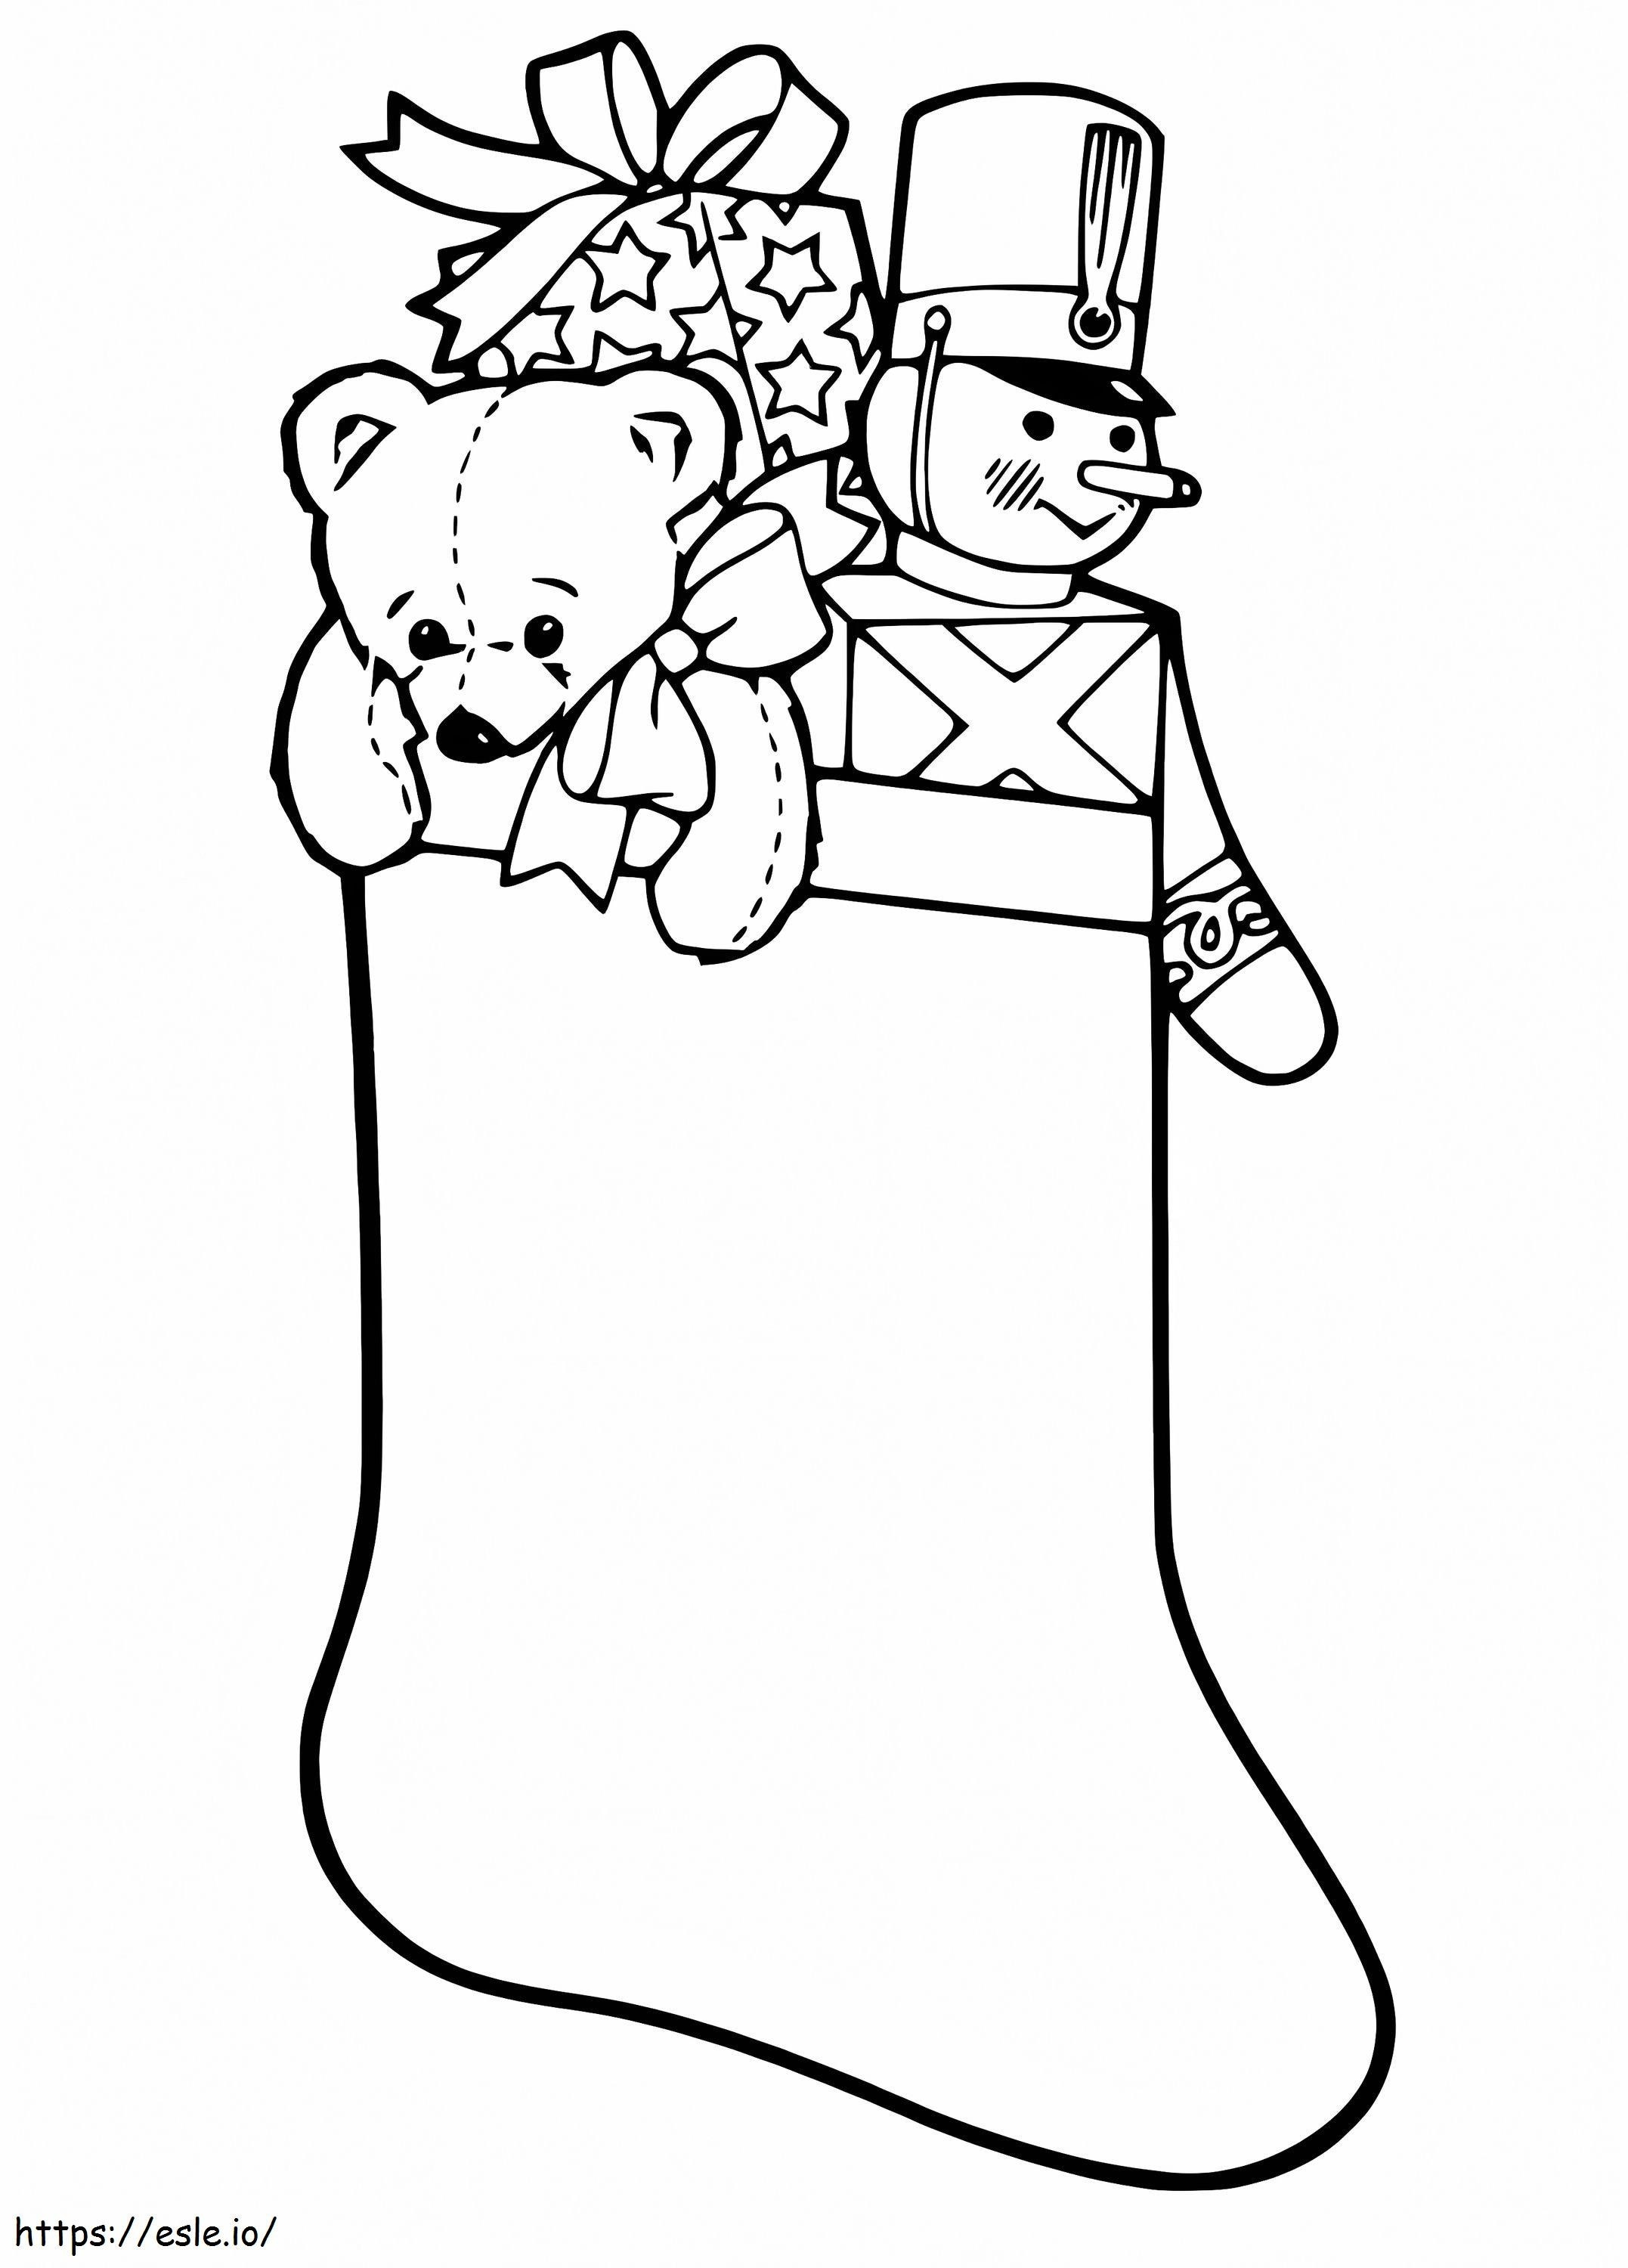 Christmas Stocking 14 coloring page